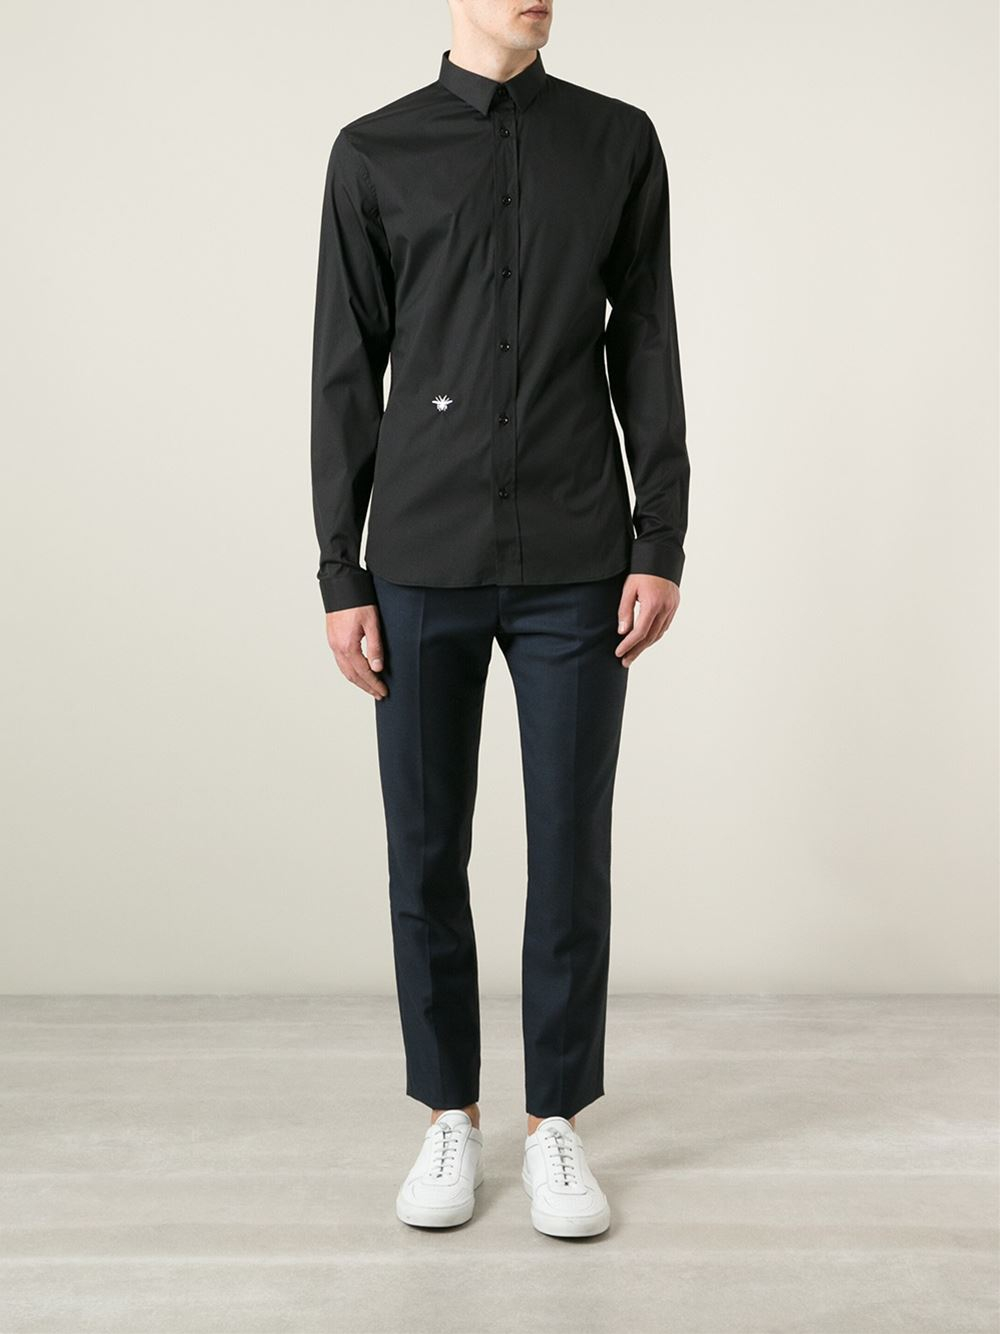 Dior Homme Embroidered Bee Shirt in Black for Men - Lyst